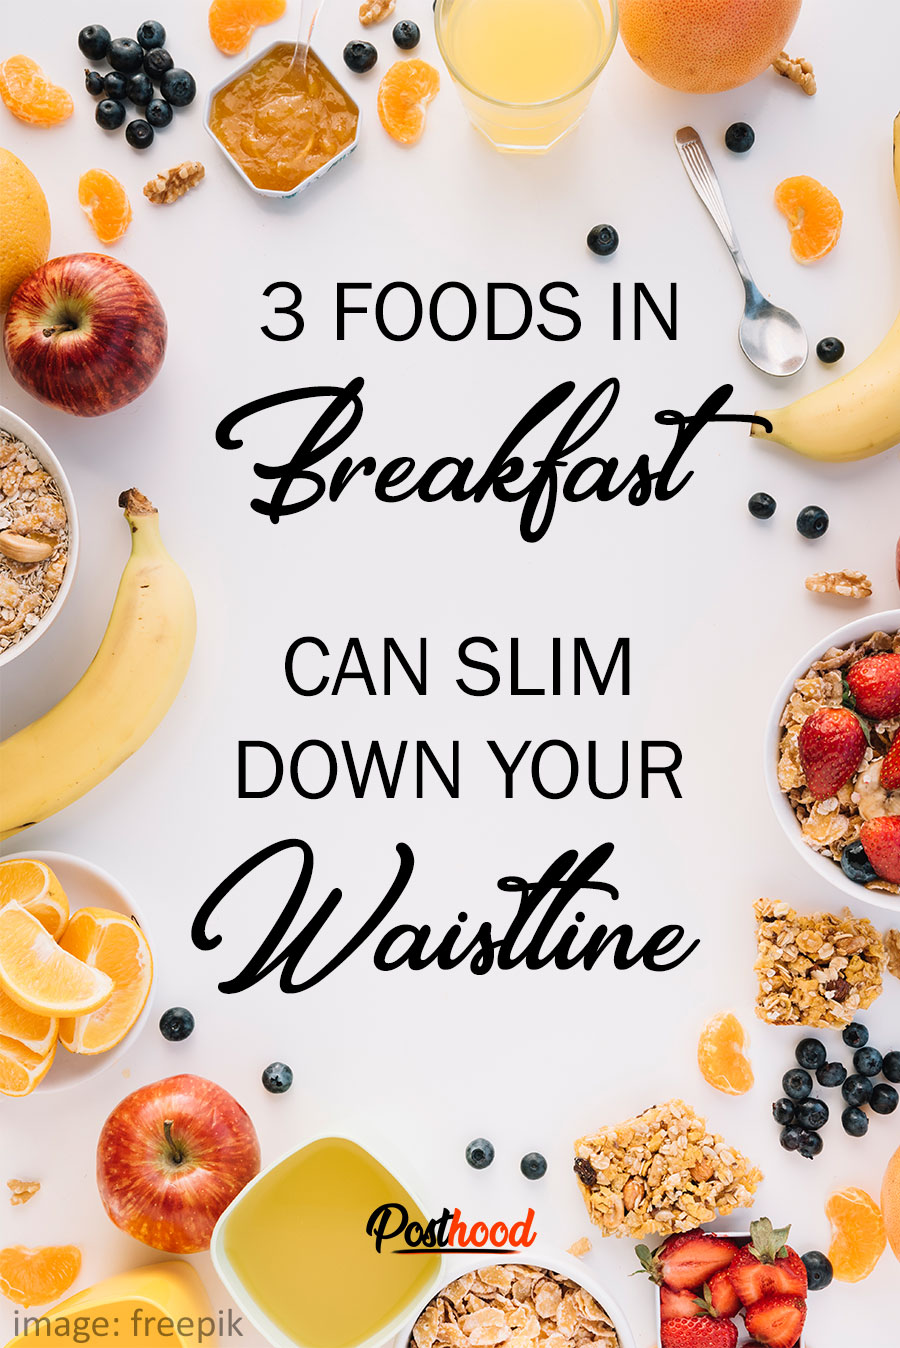 Adding These 3 Foods In Breakfast Can Slim Your Waistline. 